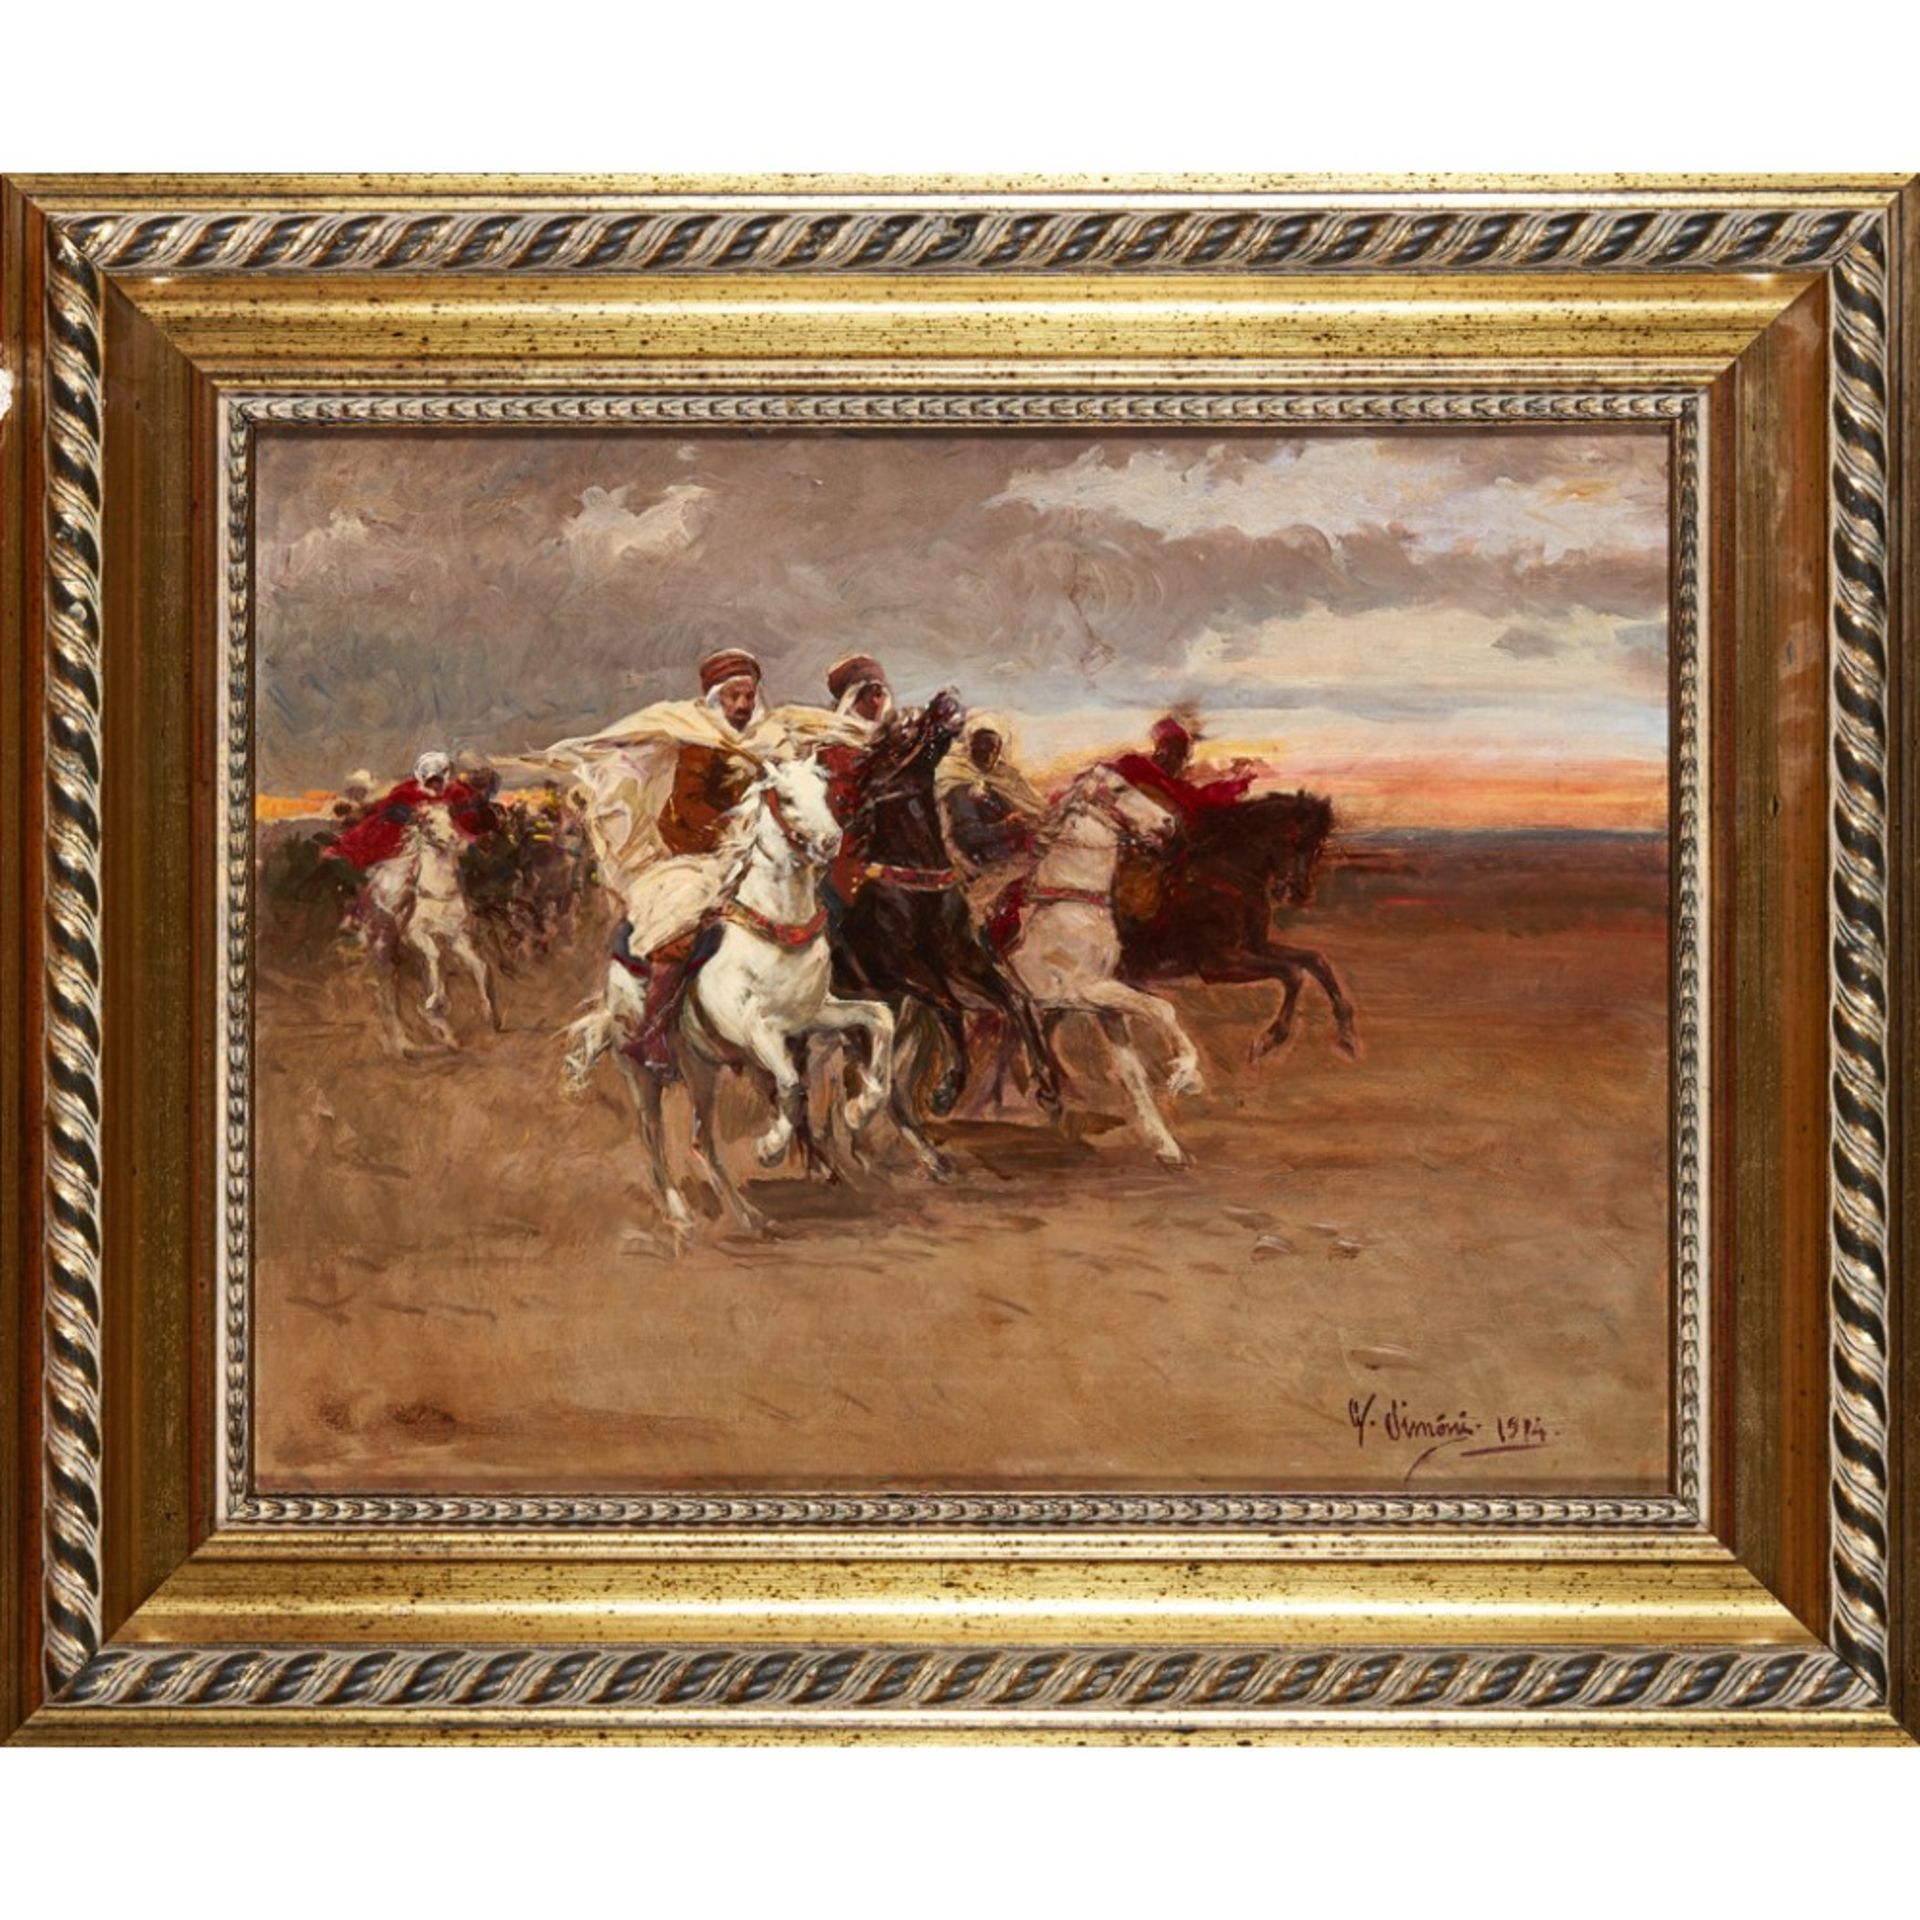 GUSTAVO SIMONI (ITALIAN 1846-1926)CHARGING CAVALIERS Signed and dated 1914, oil on canvas45.5cm x - Image 2 of 2